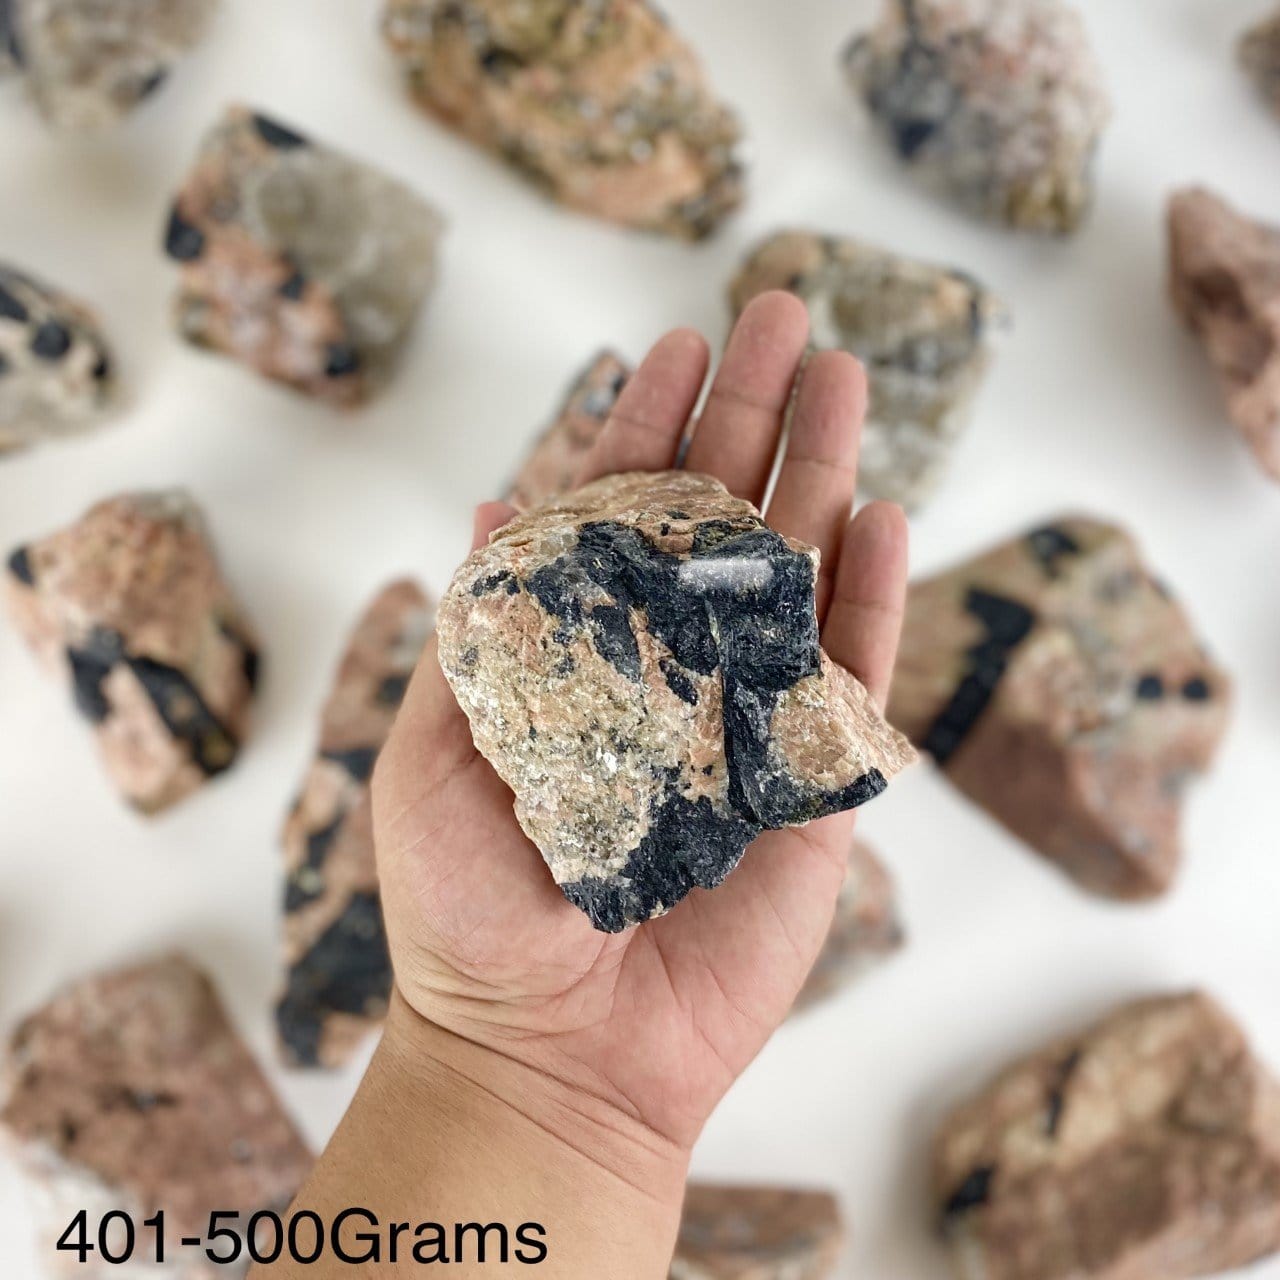 One piece of Feldspar with Black Tourmaline in the hand showing the weight of 401-500 grams.